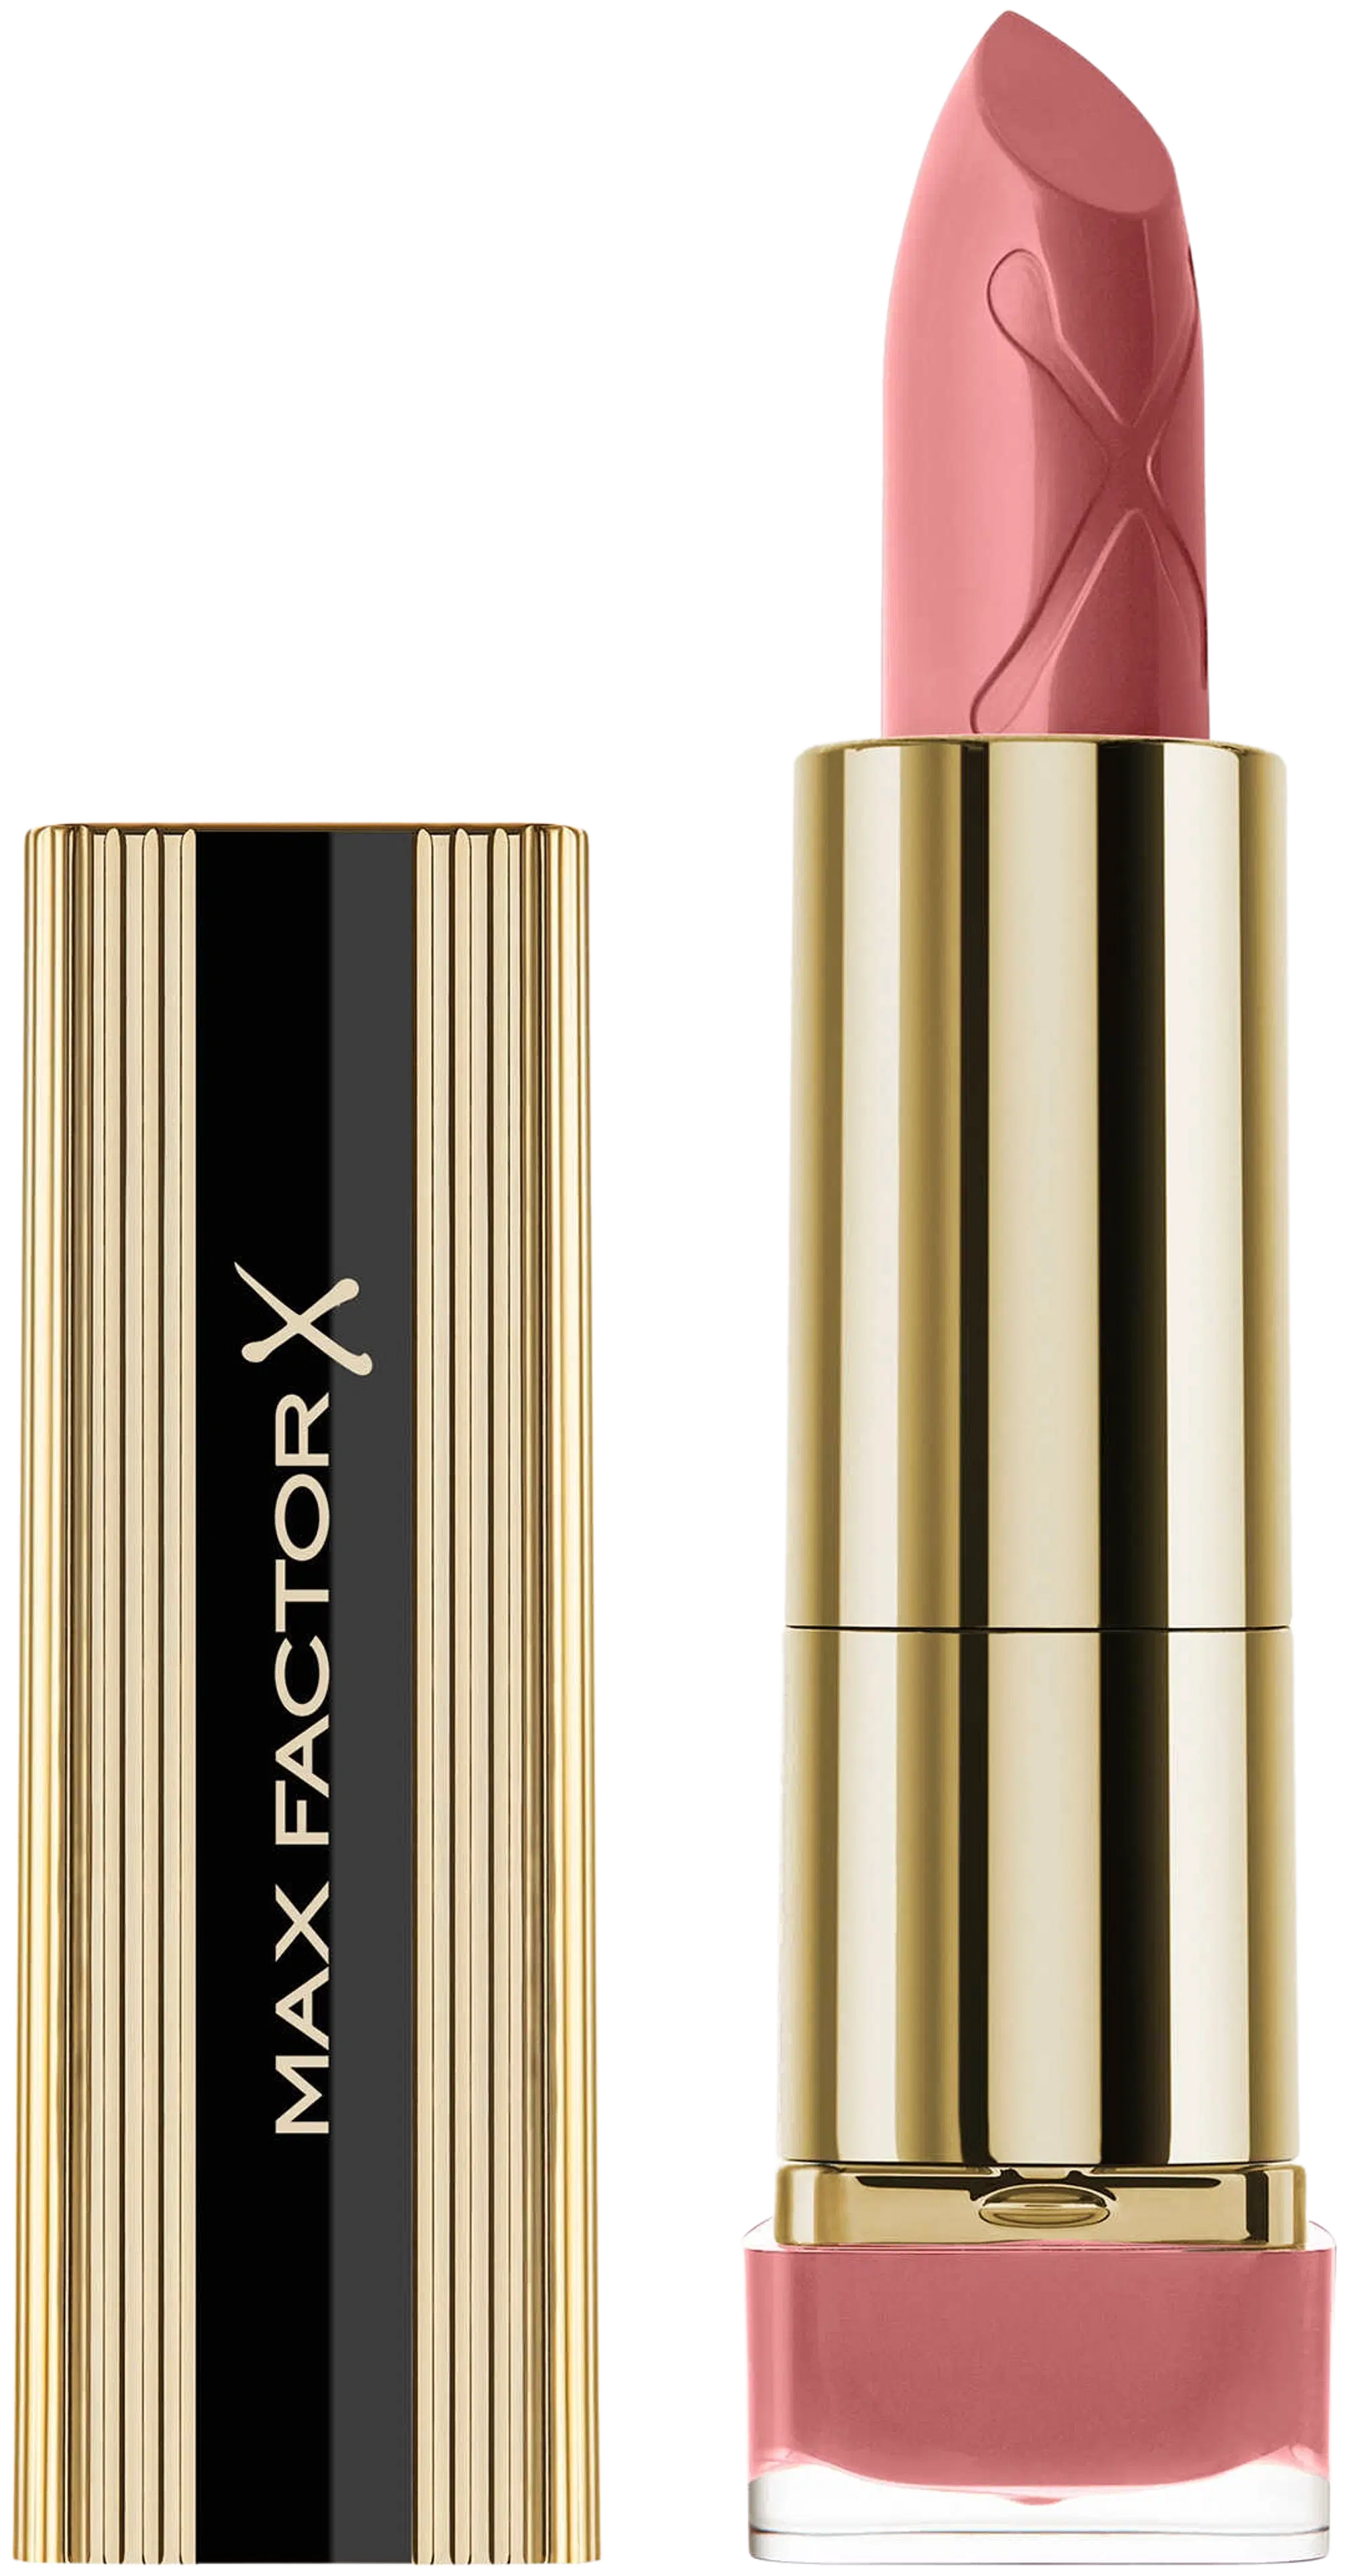 Max Factor Colour Elixir huulipuna 4 g, 010 Toasted Almond